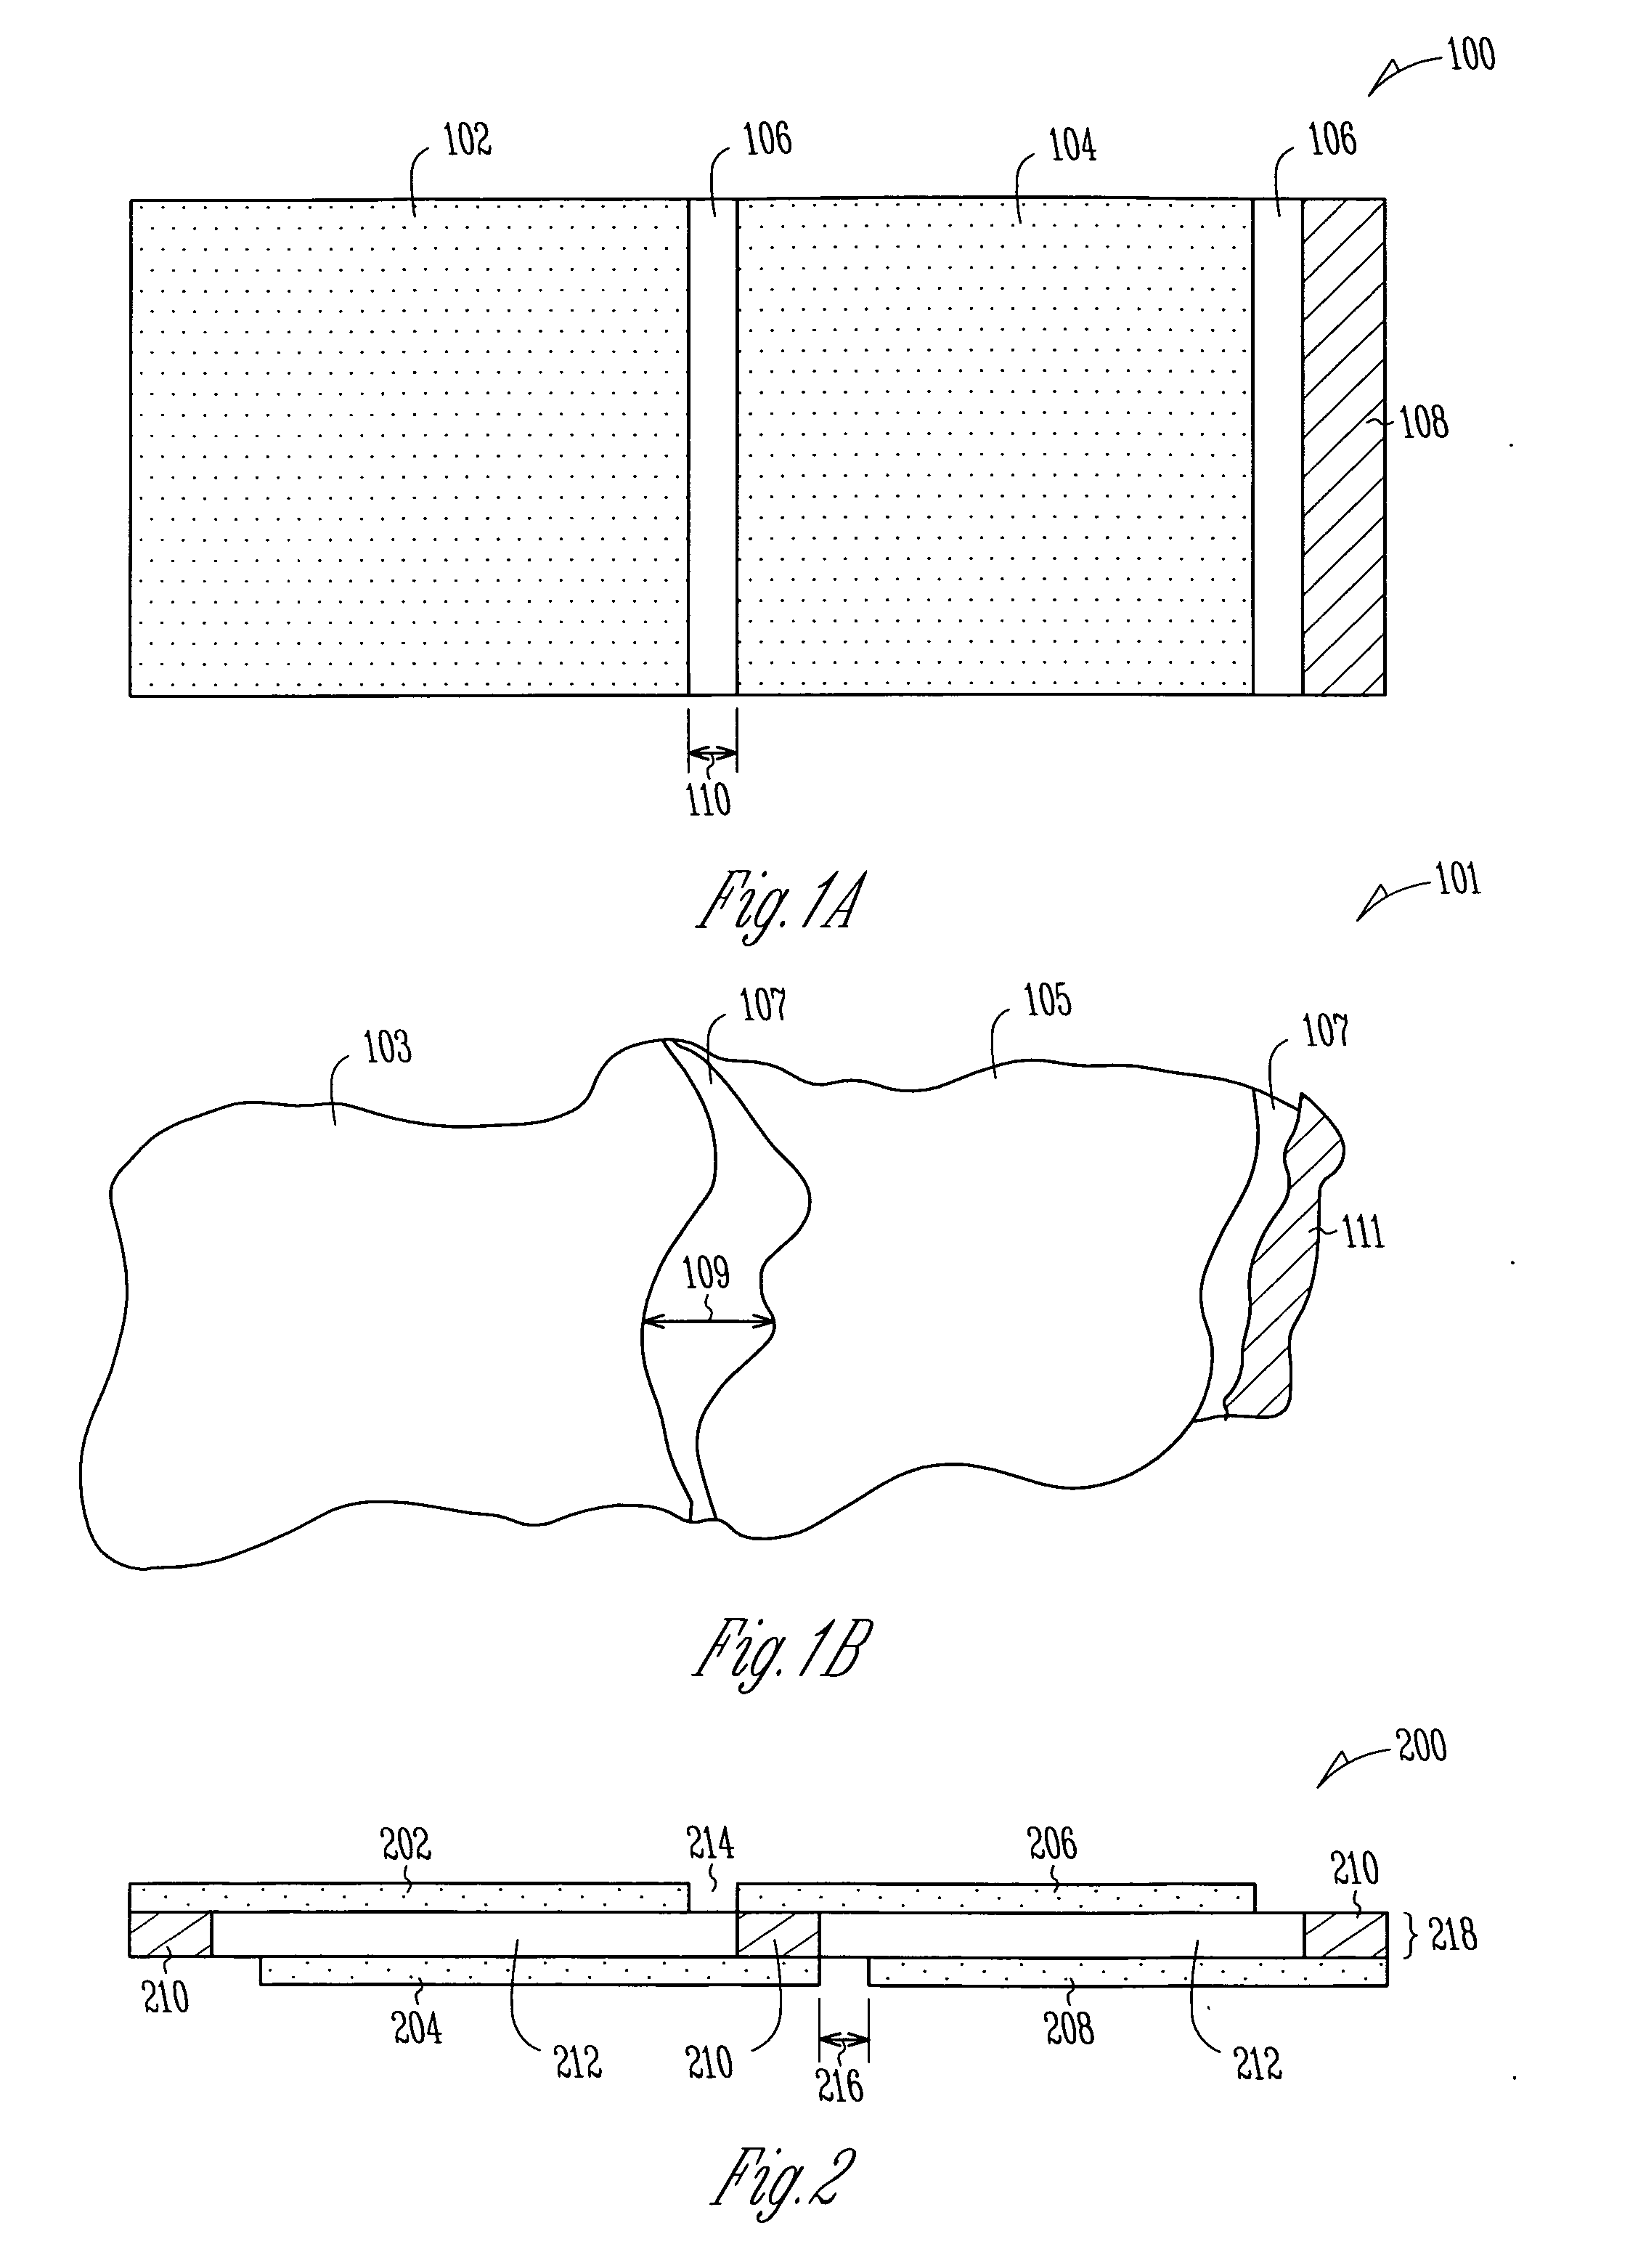 Electrochemical cell assemblies including a region of discontinuity